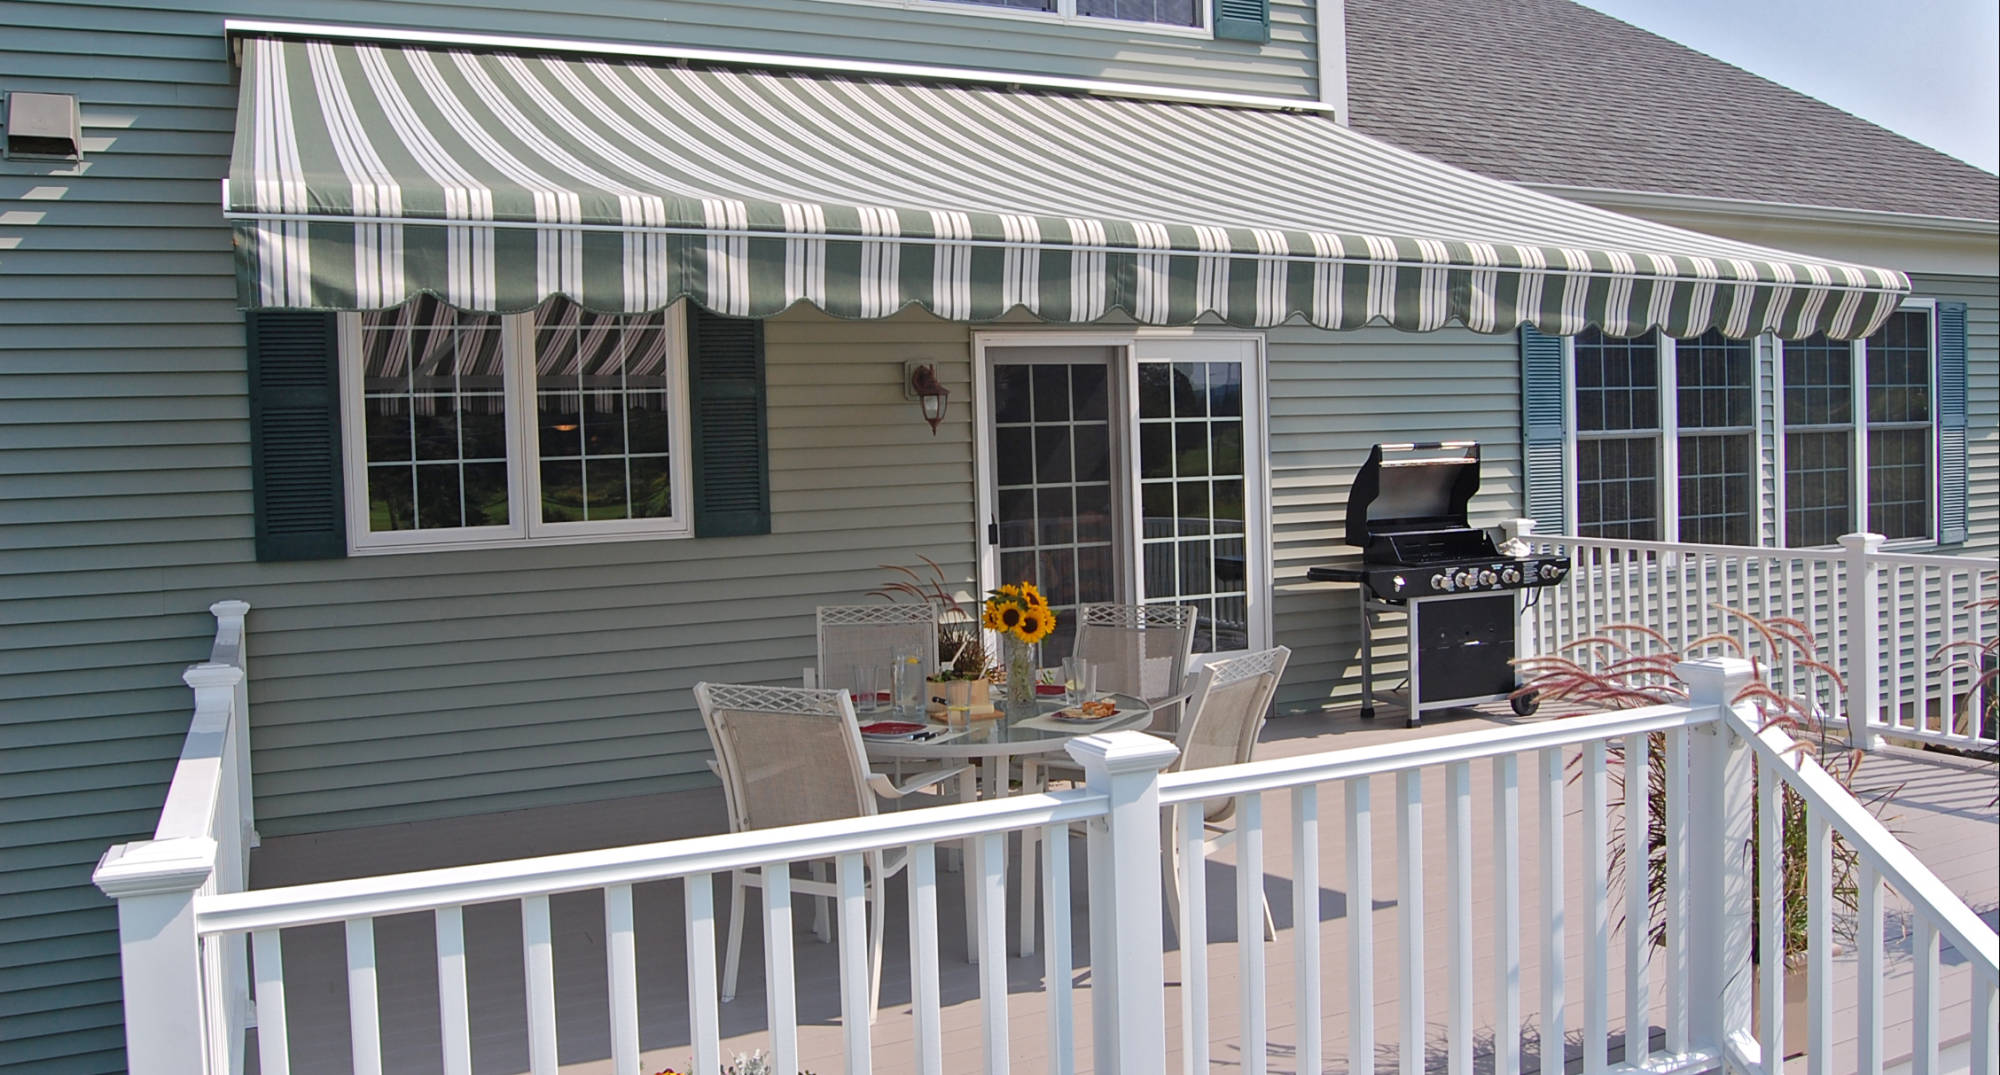 Get Best Solutions With Regal Awnings